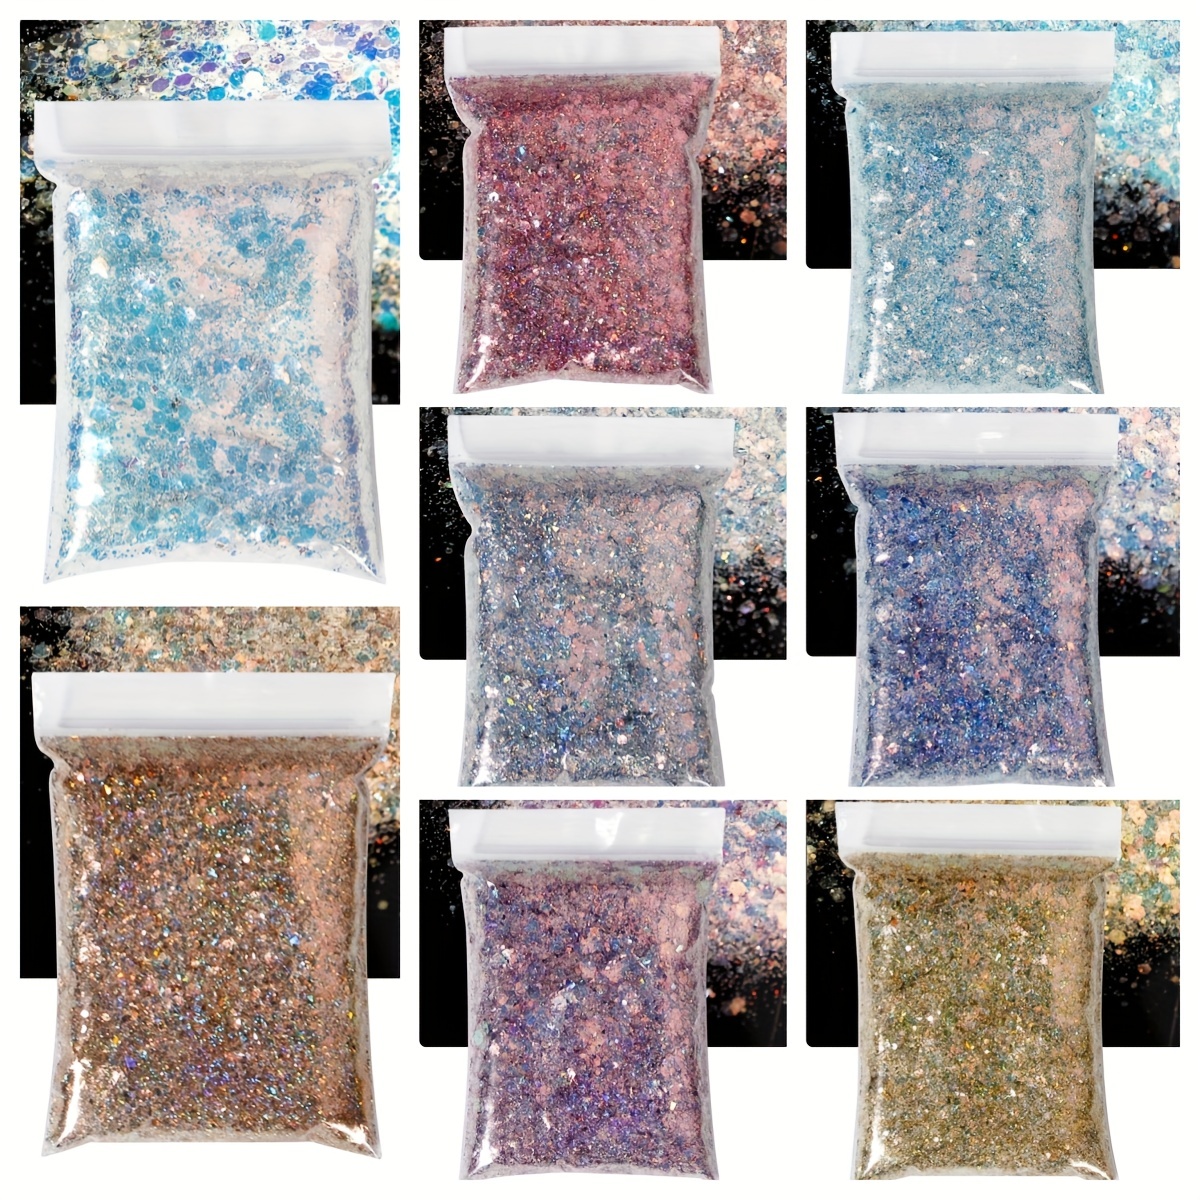 10G Mixed Colorful Hexagon Chunky Glitter for Resin Shiny Nails